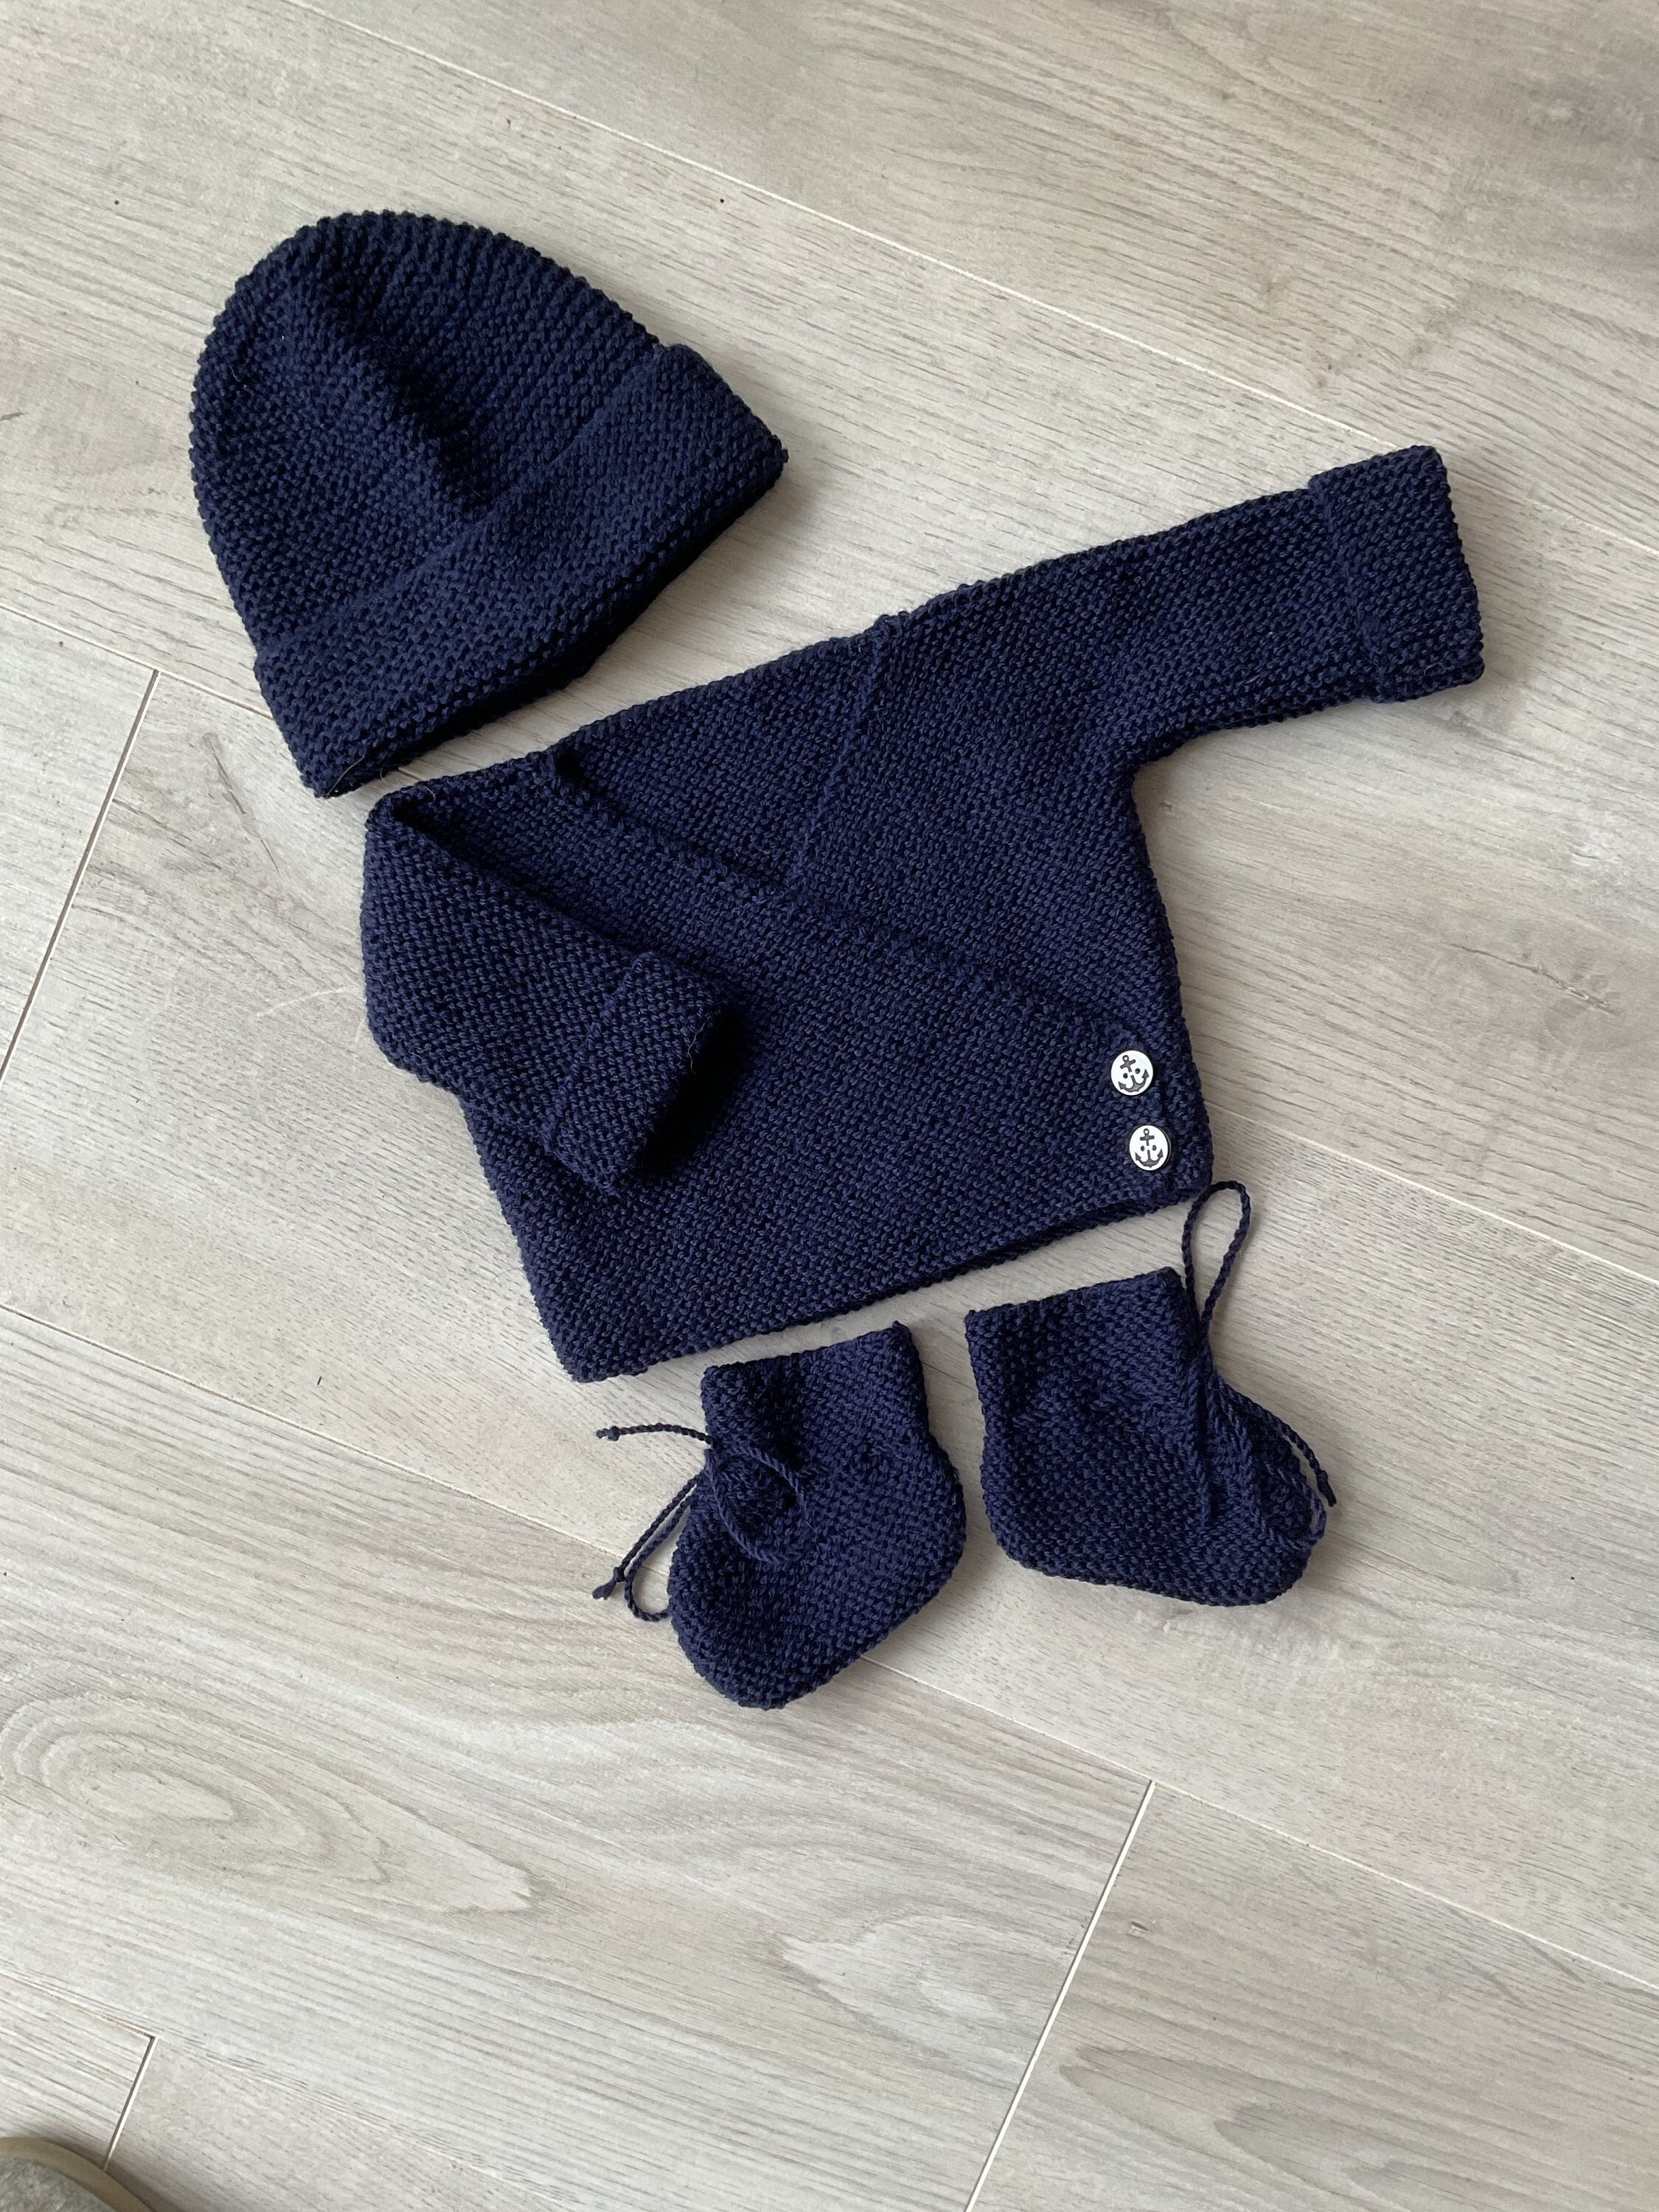 Handmade Knitted Newborn Set, for Baby Boy. Stock Photo - Image of romper,  background: 184492362